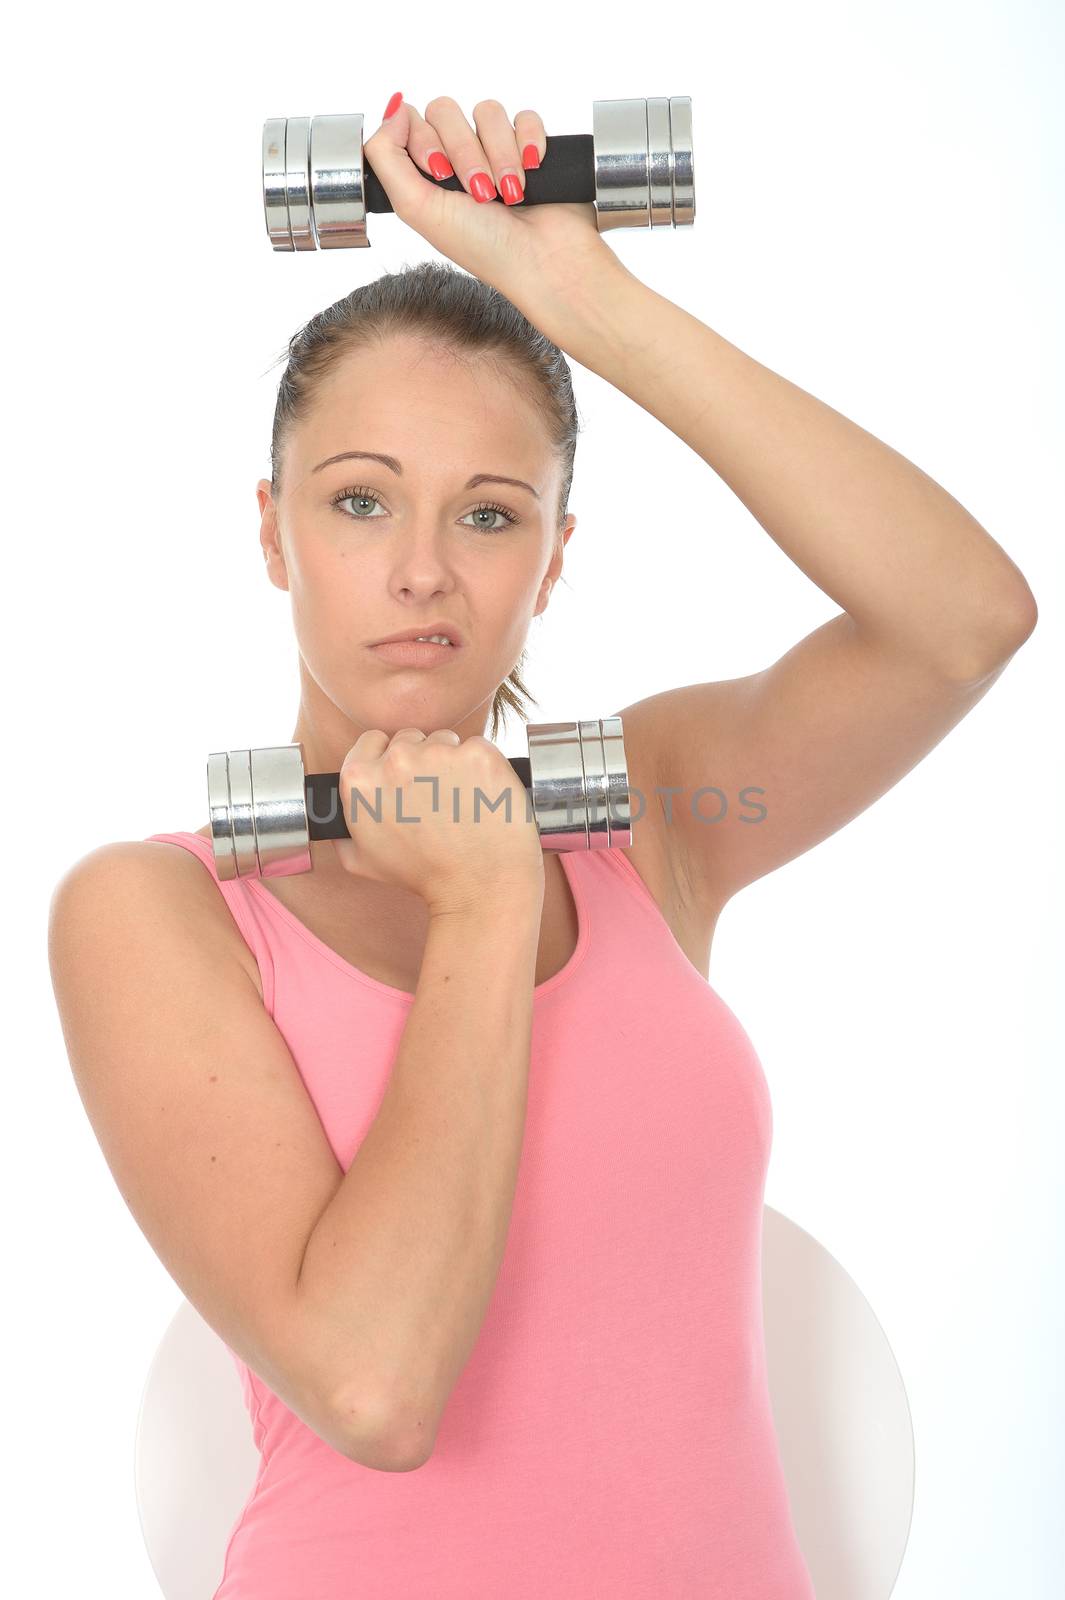 Healthy Young Woman Stressing While Training With Weights by Whiteboxmedia